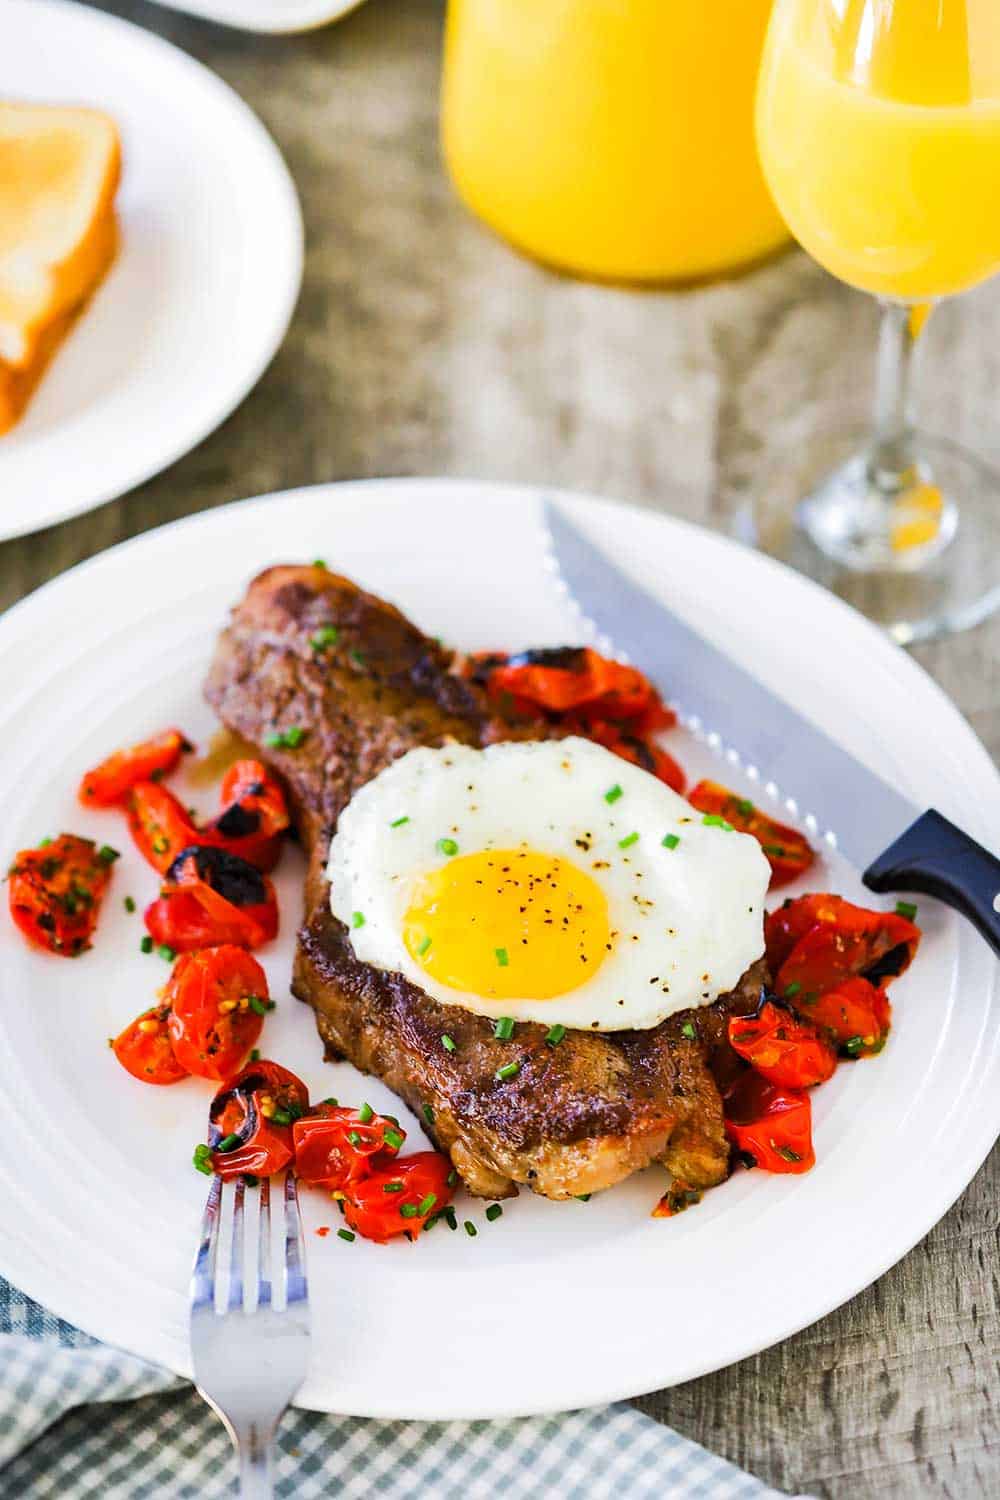 A view looking down on a white plate filled with a seared New York strip steak topped with a fried egg next to roasted tomatoes with a glass of orange juice nearby.